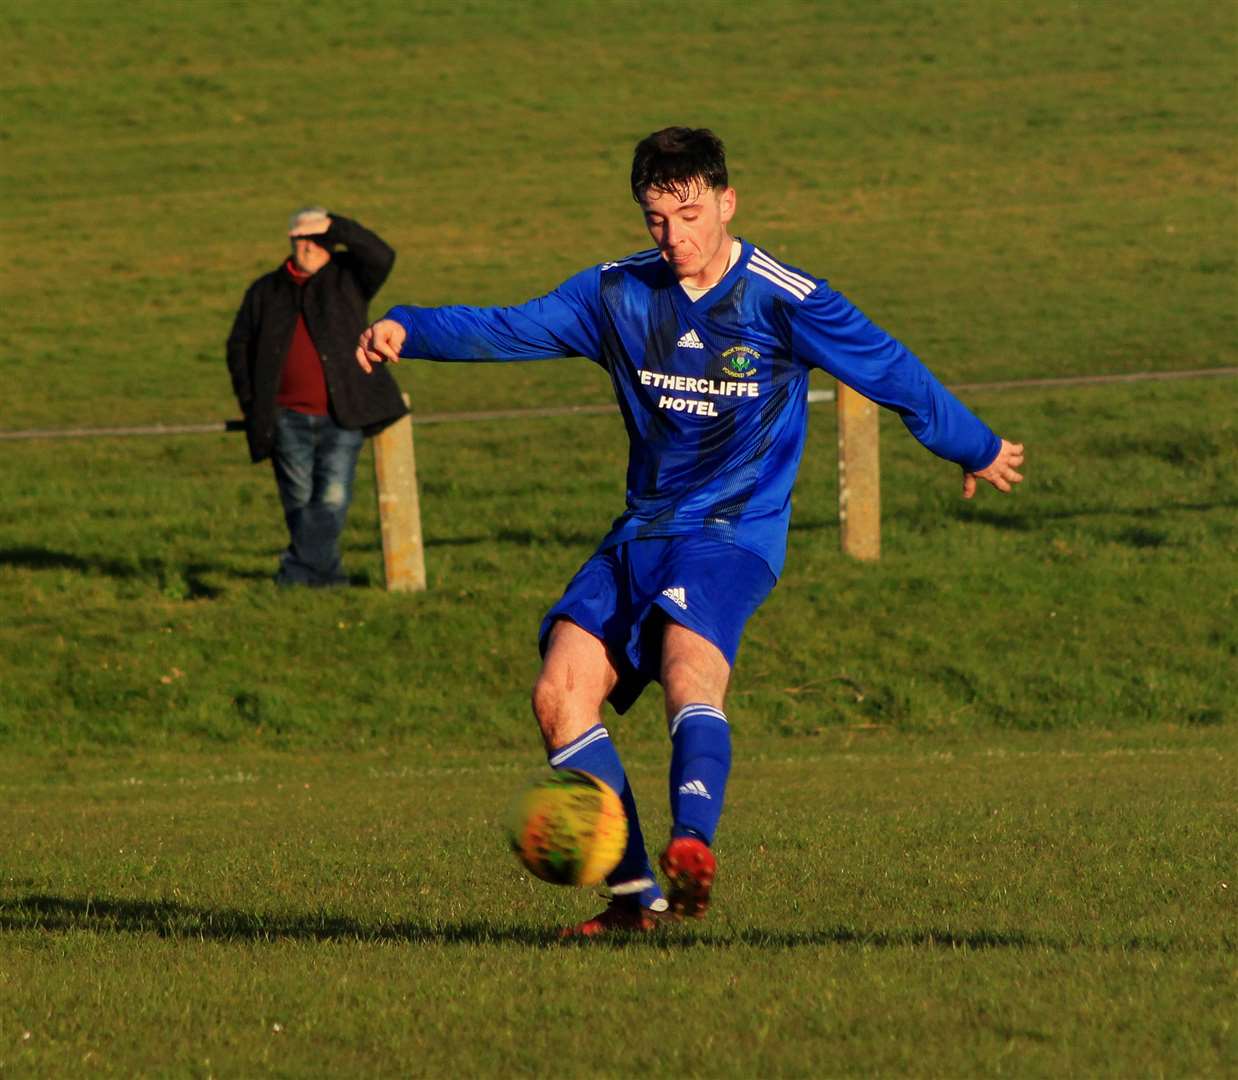 Kyle Henderson scored twice for Wick Thistle.